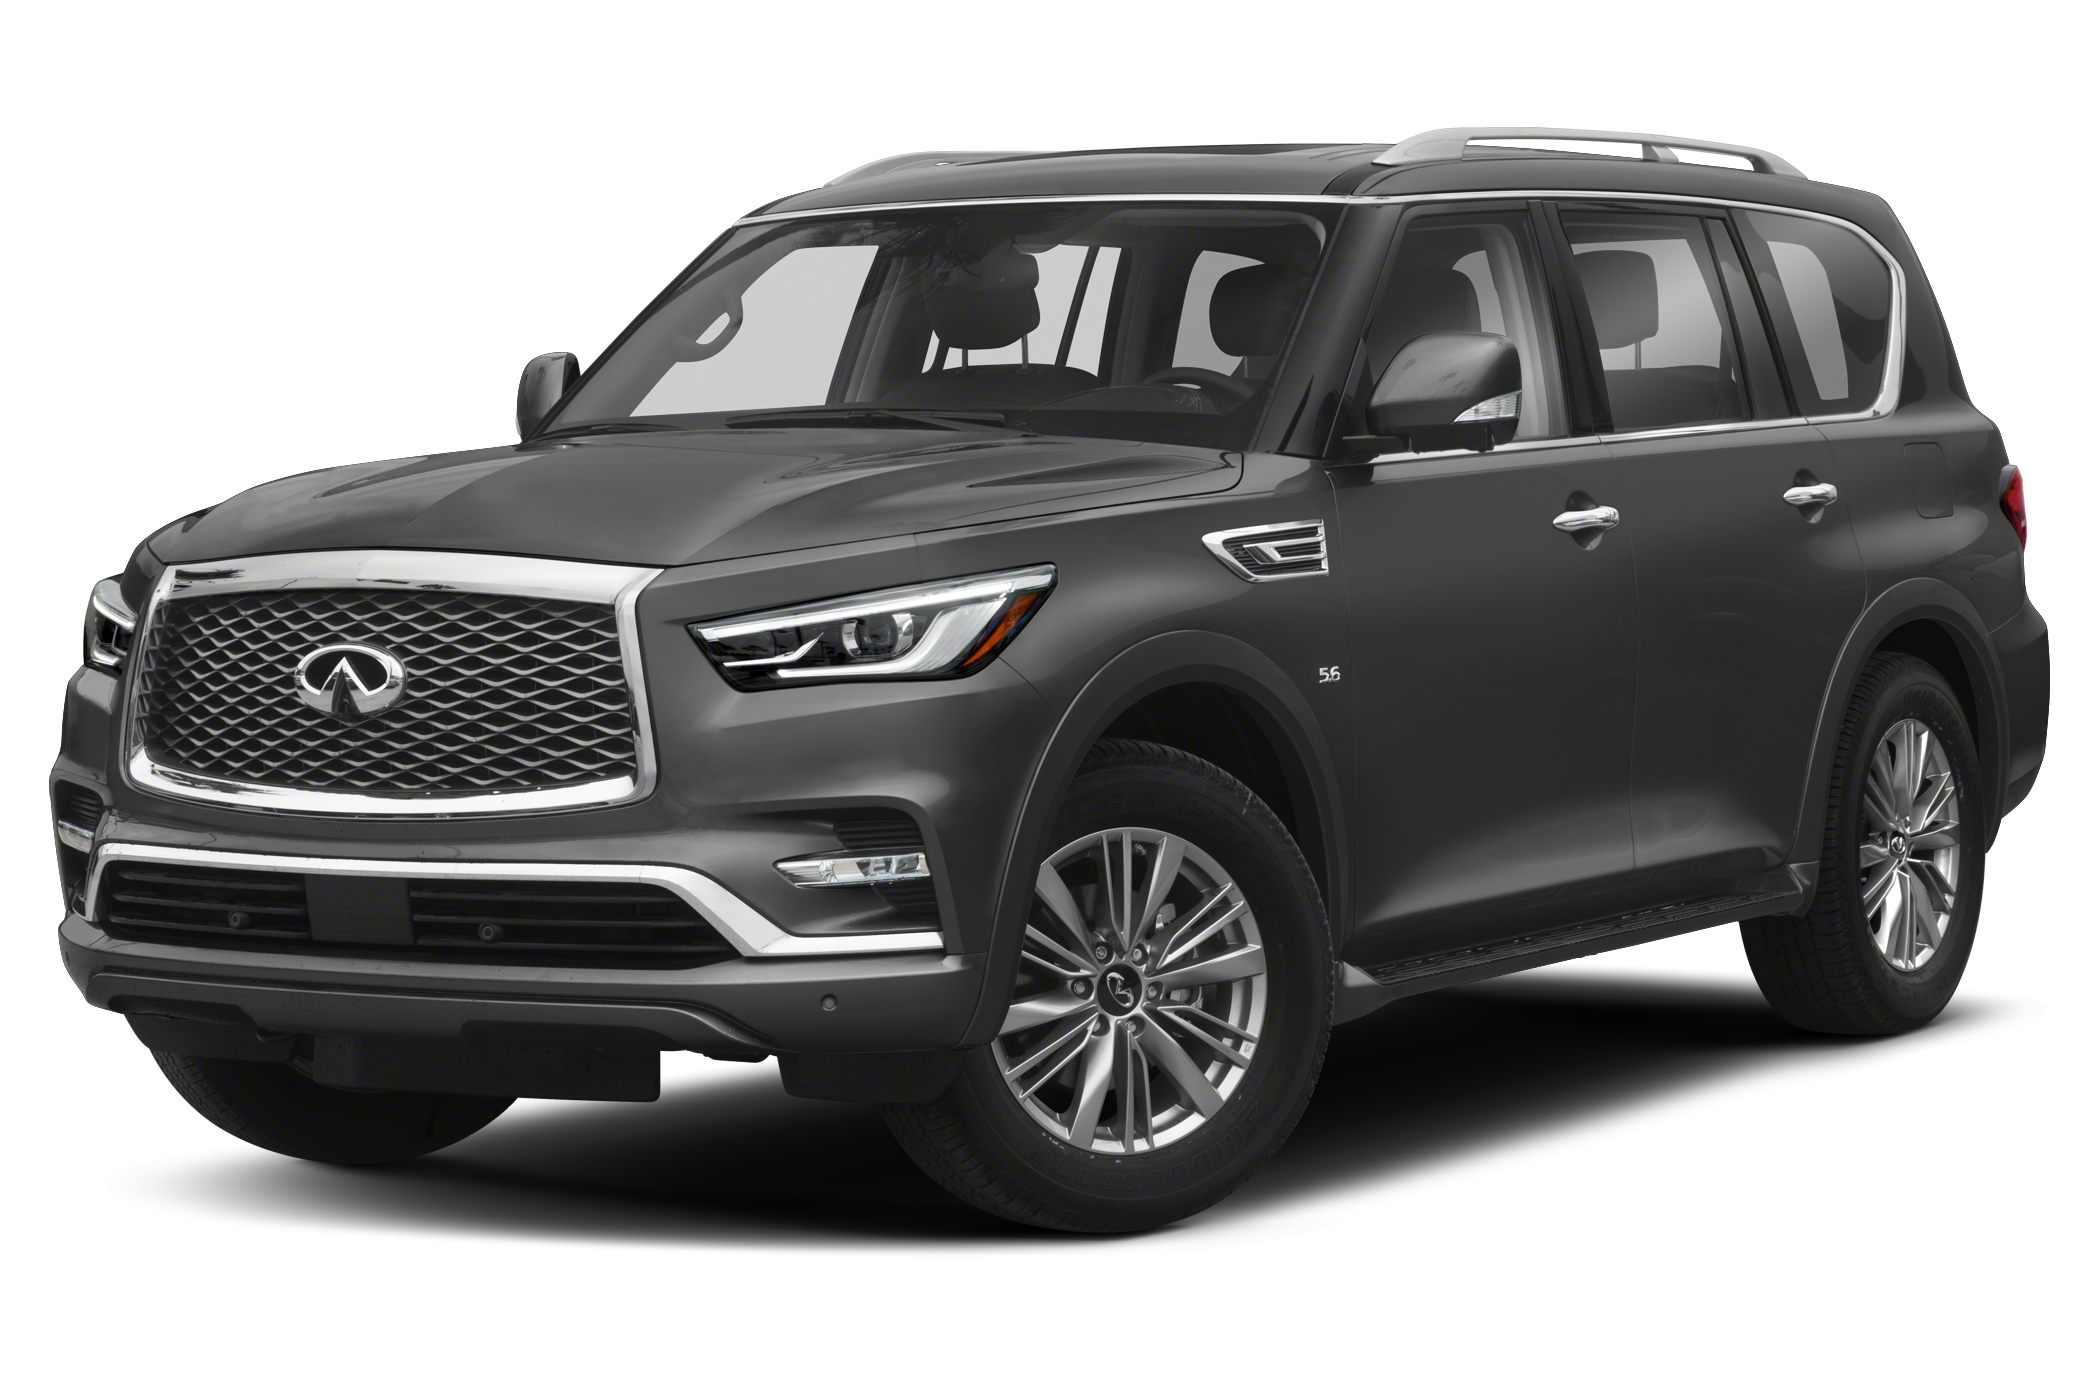 2021-infiniti-qx80-see-pricing-changes-new-trim-levels-autoblog